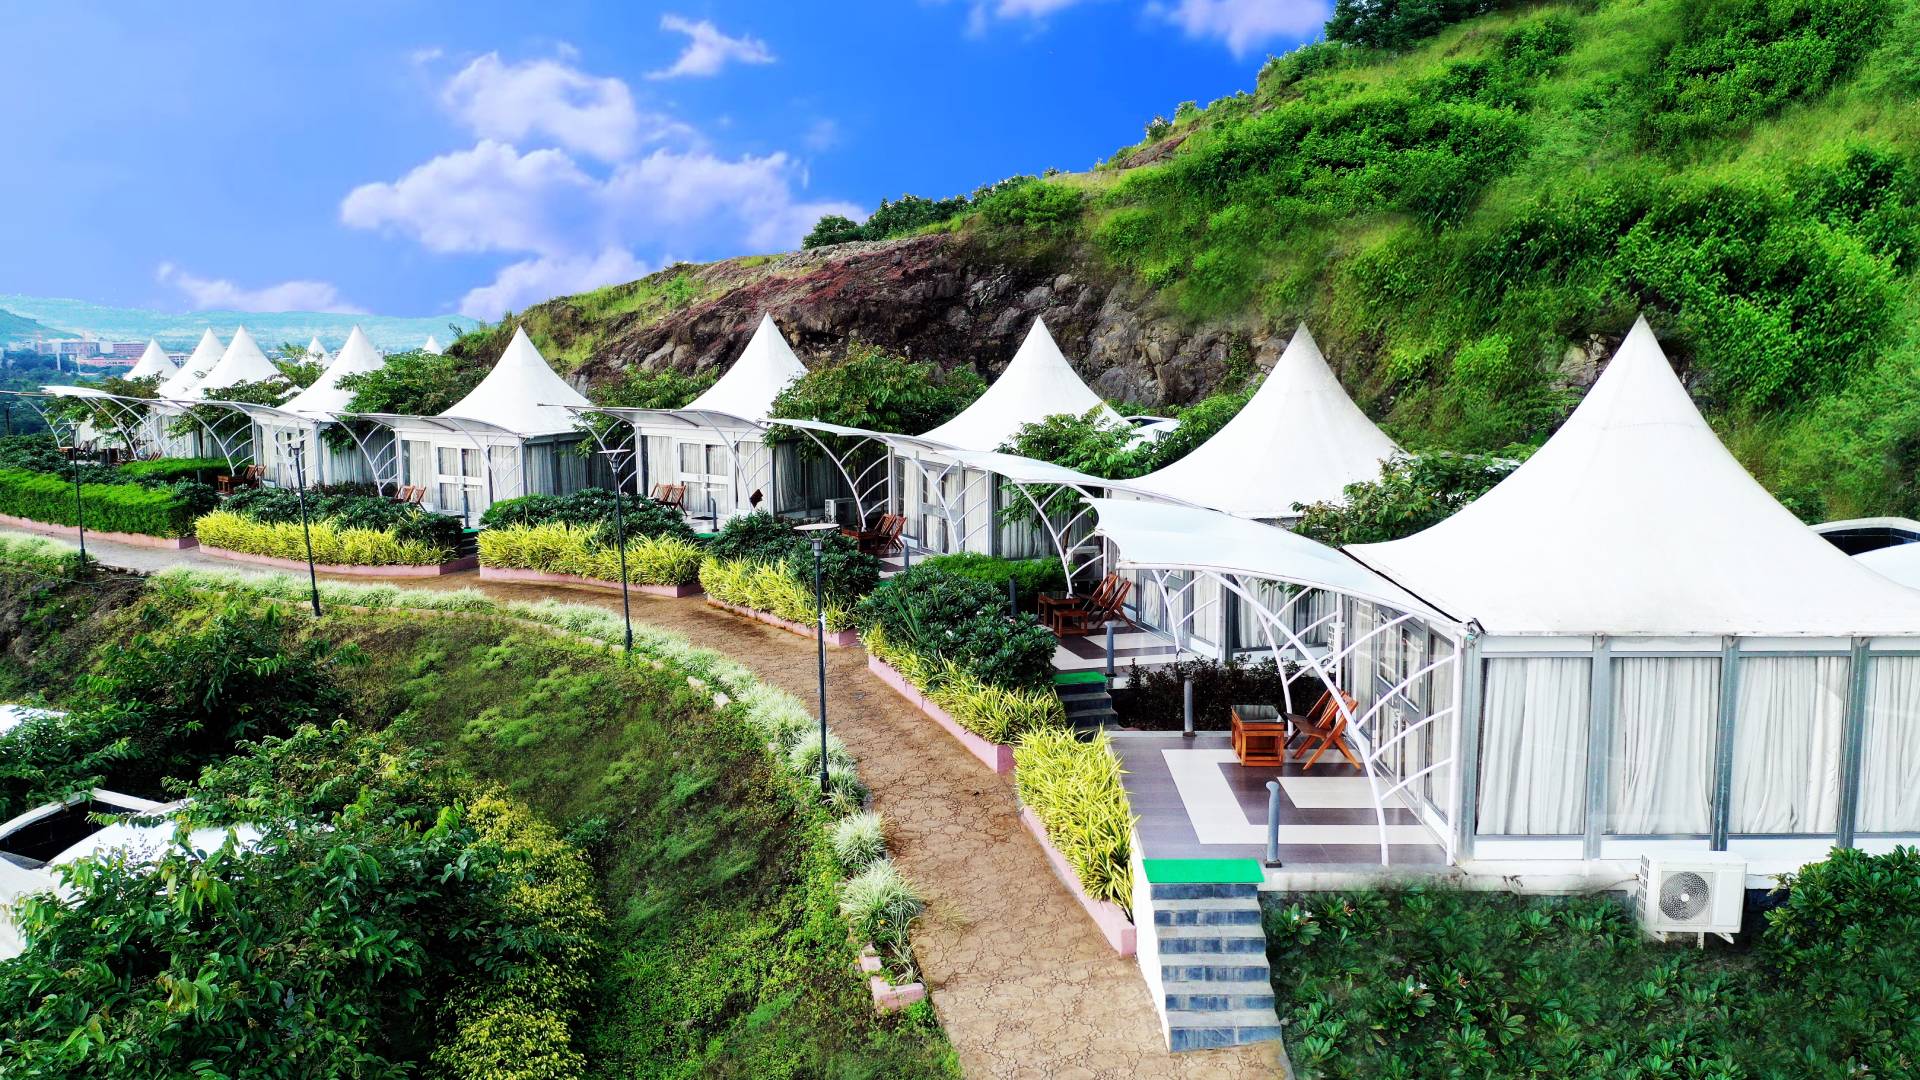 THE TOPAZ AC LUXURIOUS GLASS TENTS at Sunny's World Pune (7)